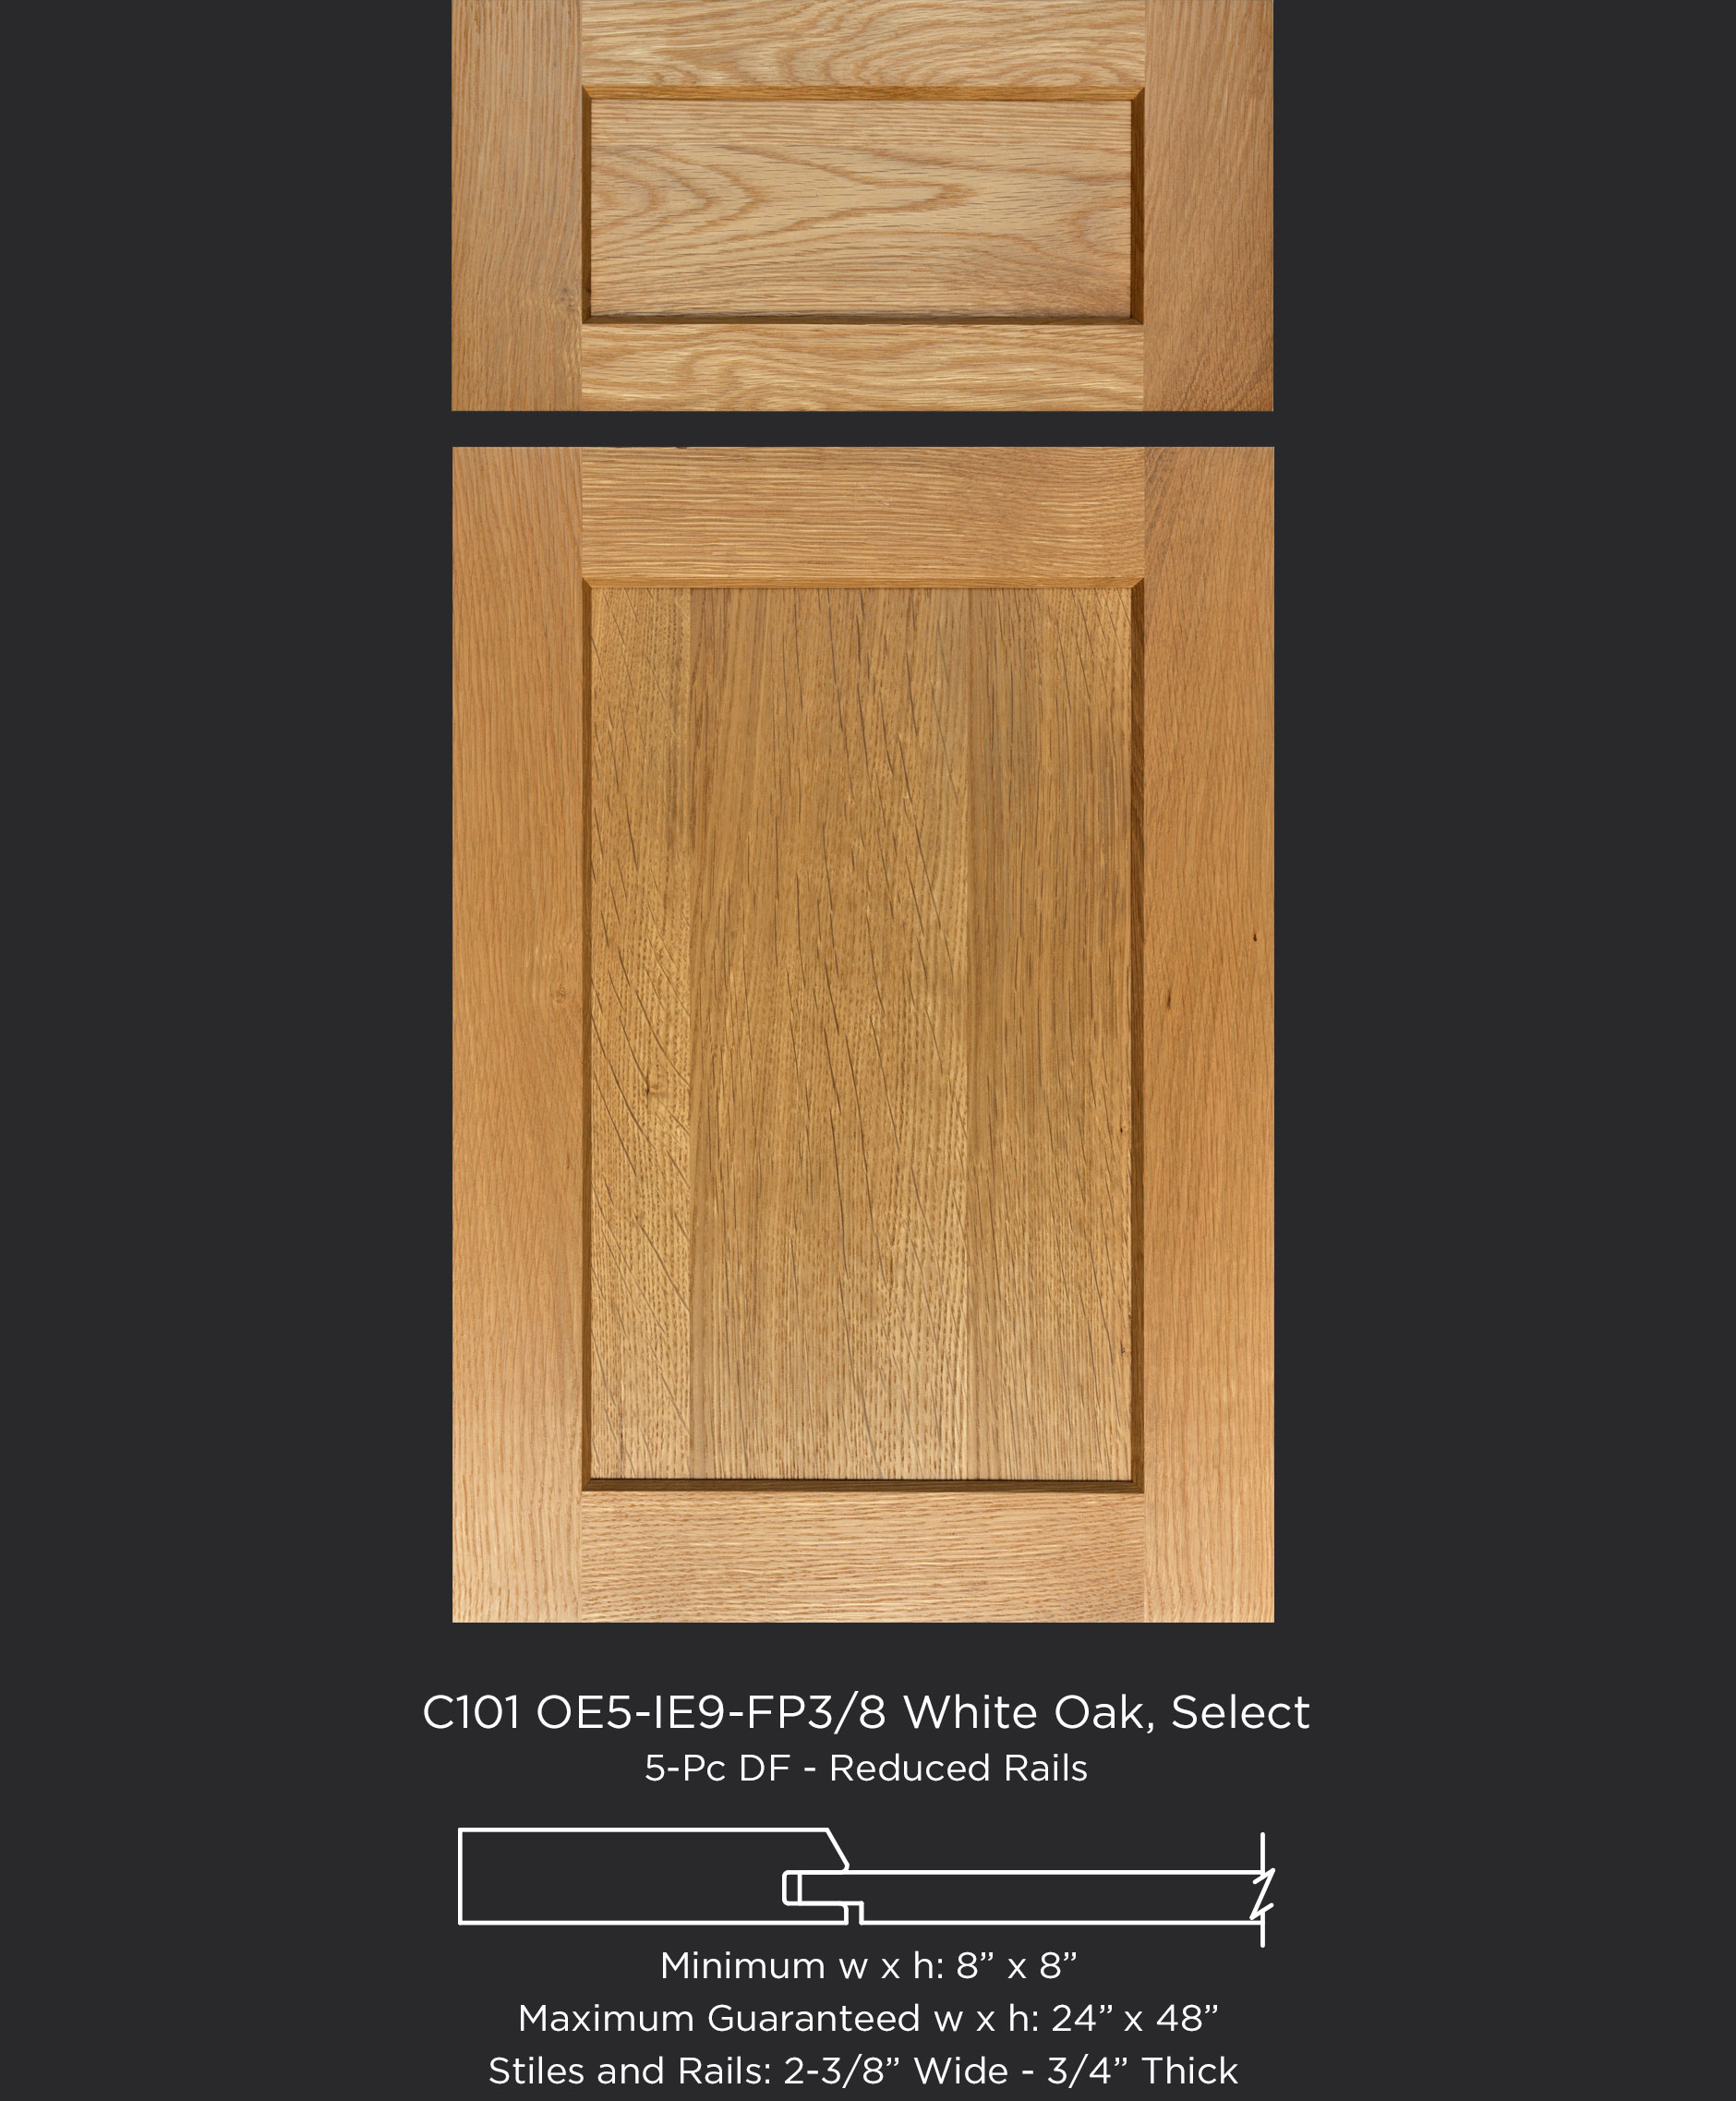 Cope and Stick Cabinet Door C101 OE5-IE9-FP3/8 in White Oak Select